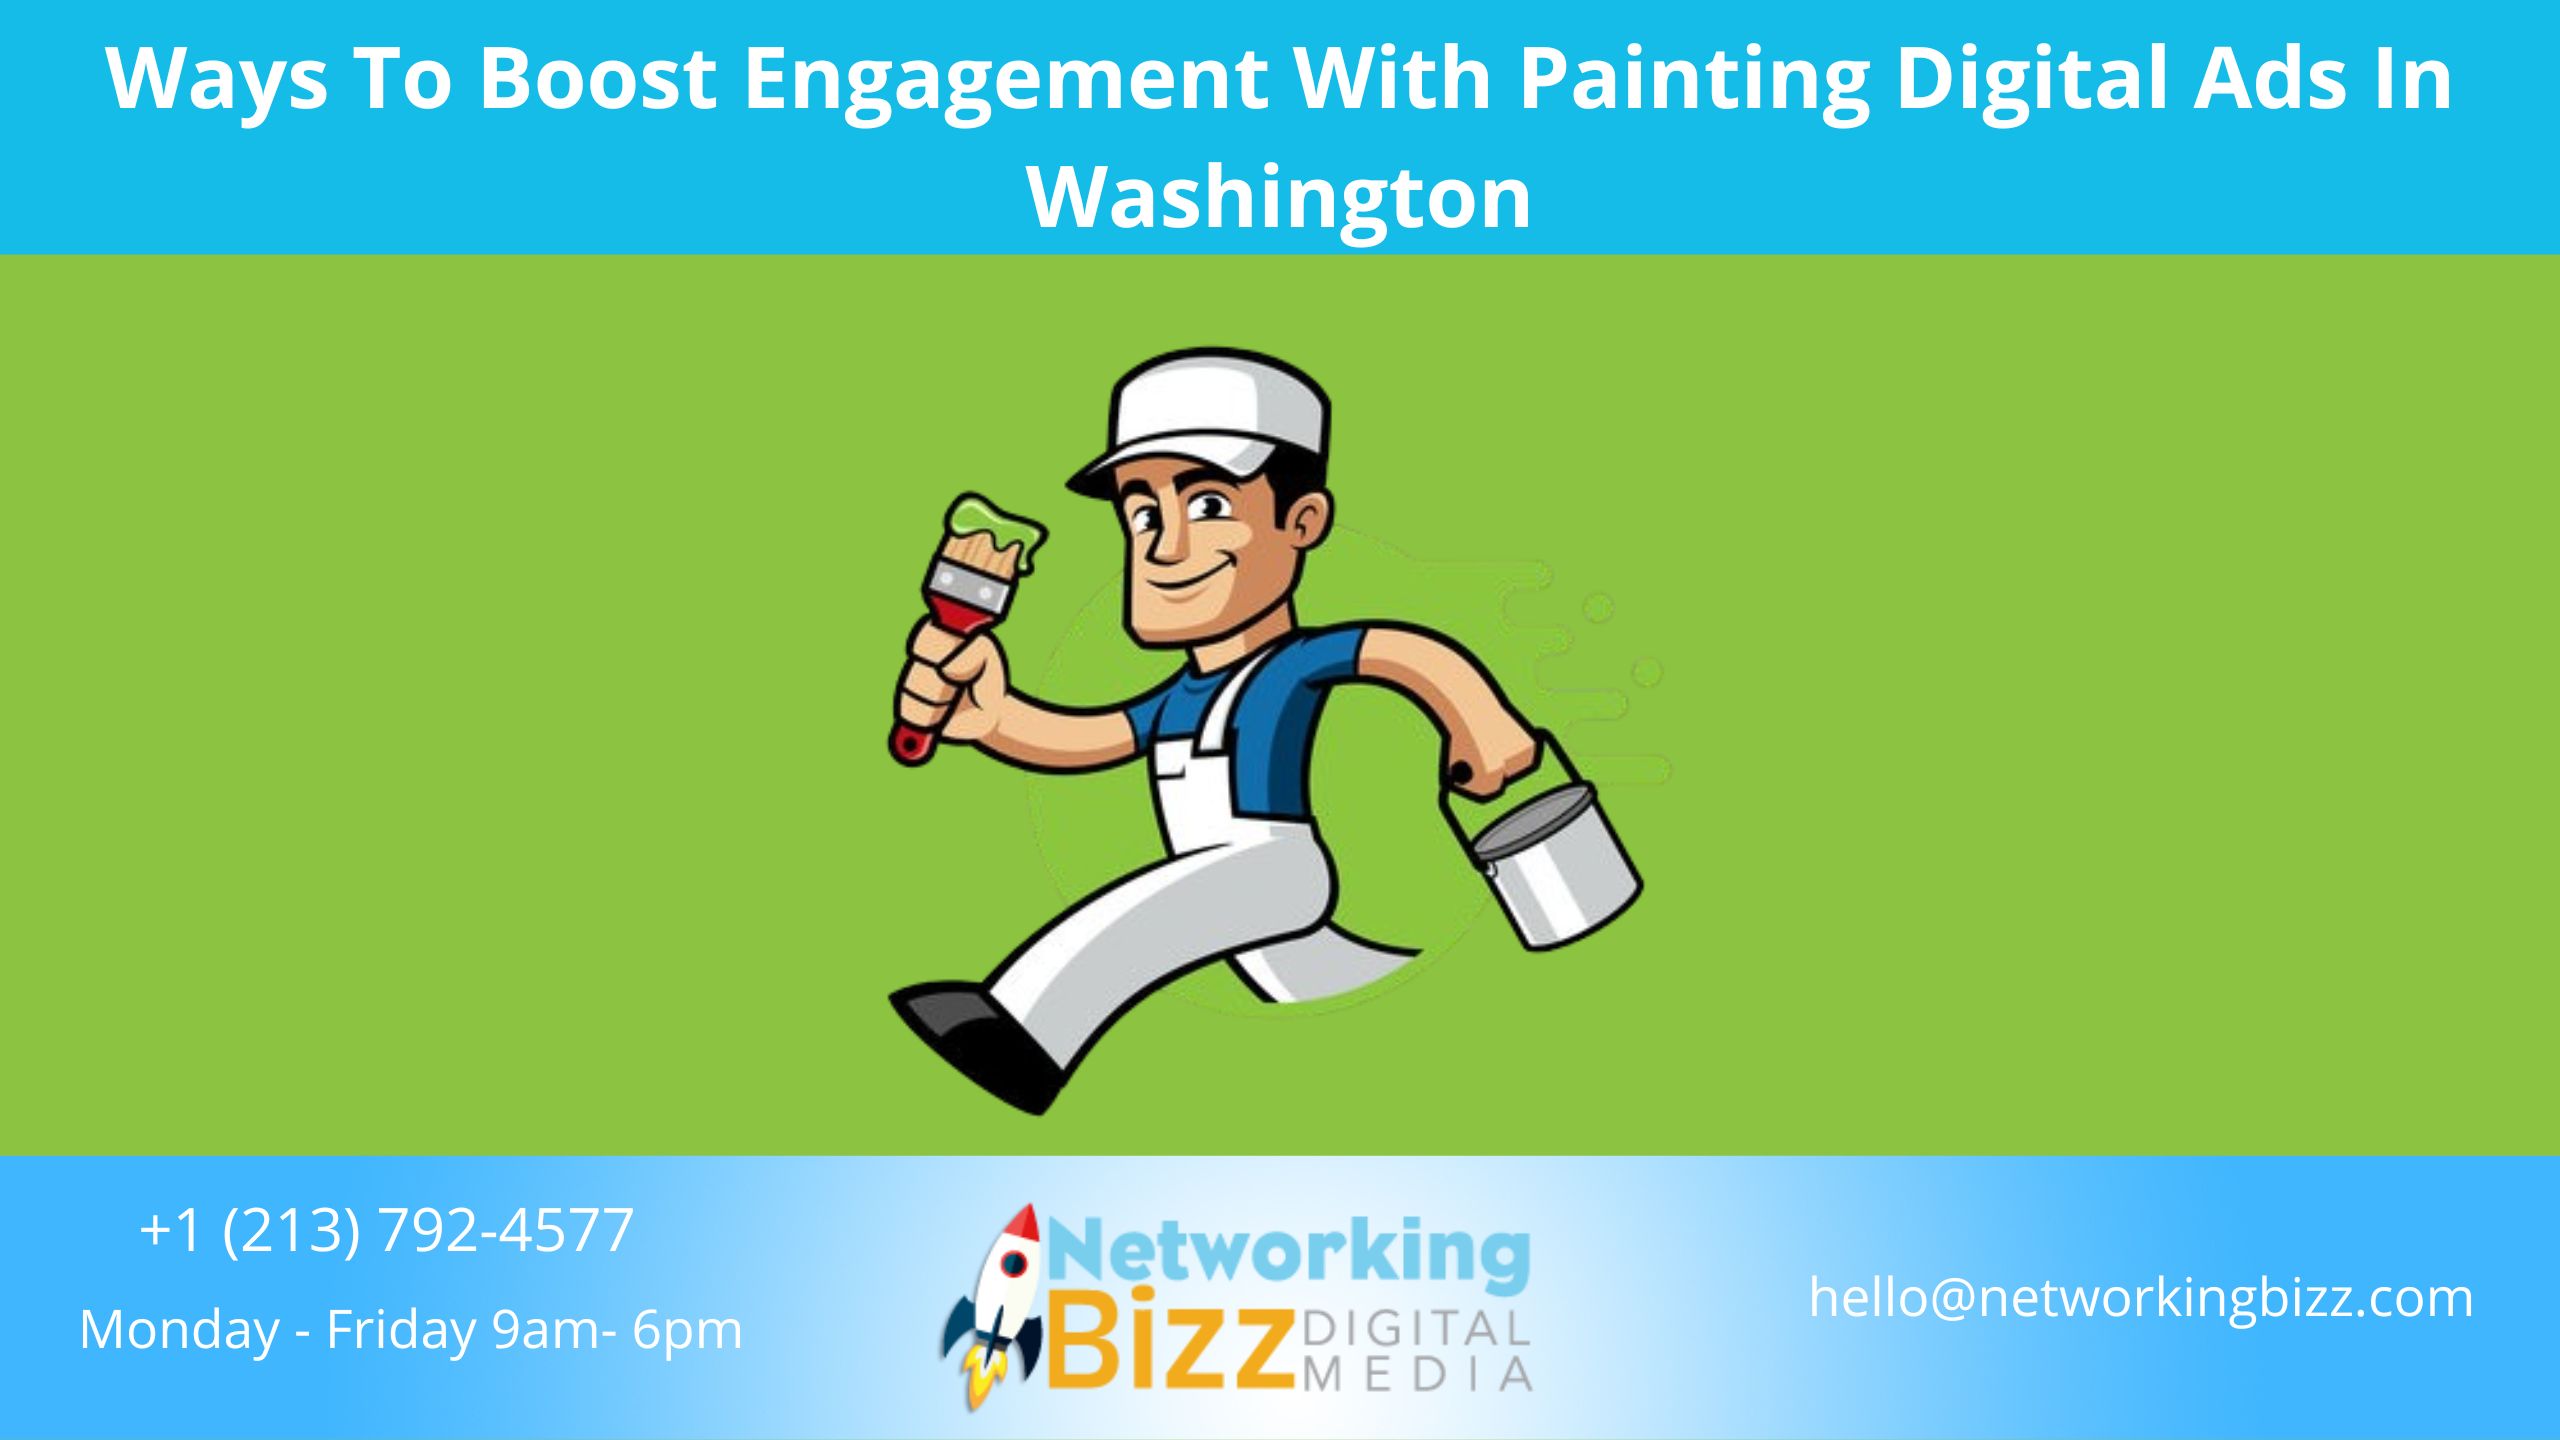 Ways To Boost Engagement With Painting Digital Ads In Washington